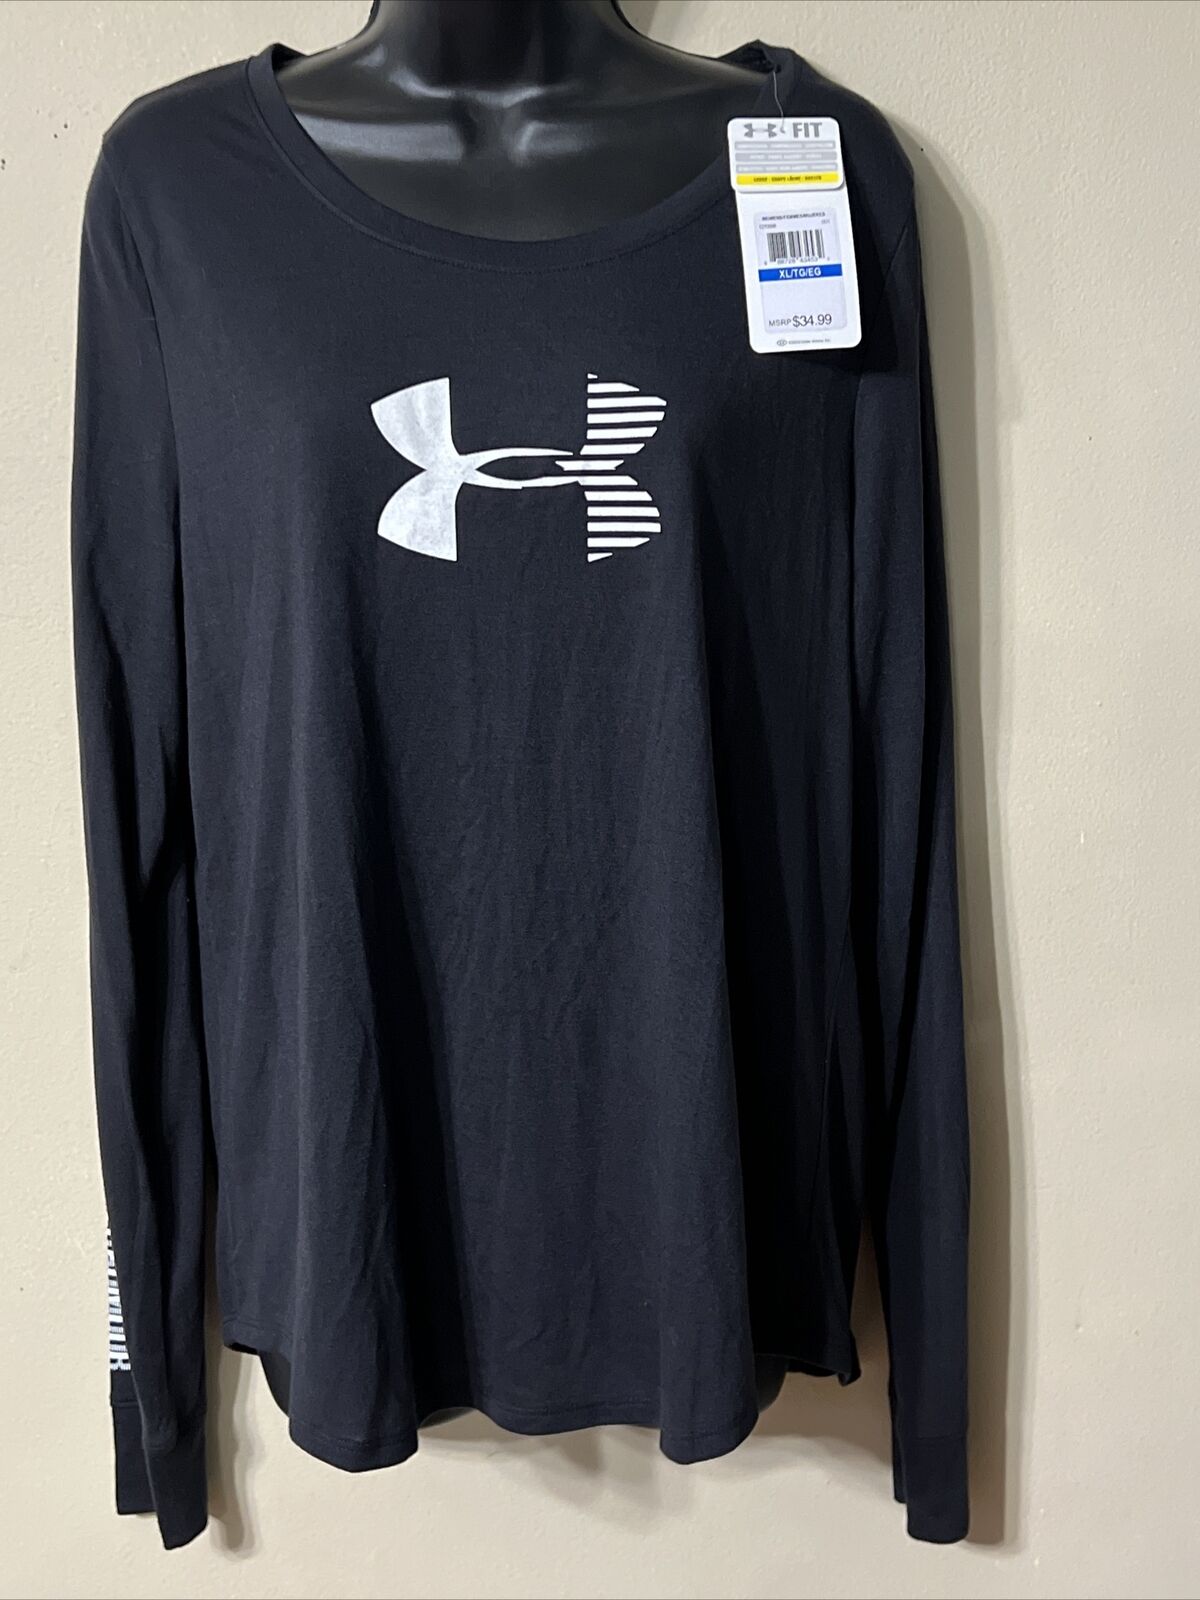 Nwt Under Armour Women's Long Sleeve Shirt Black With White Logo Xl